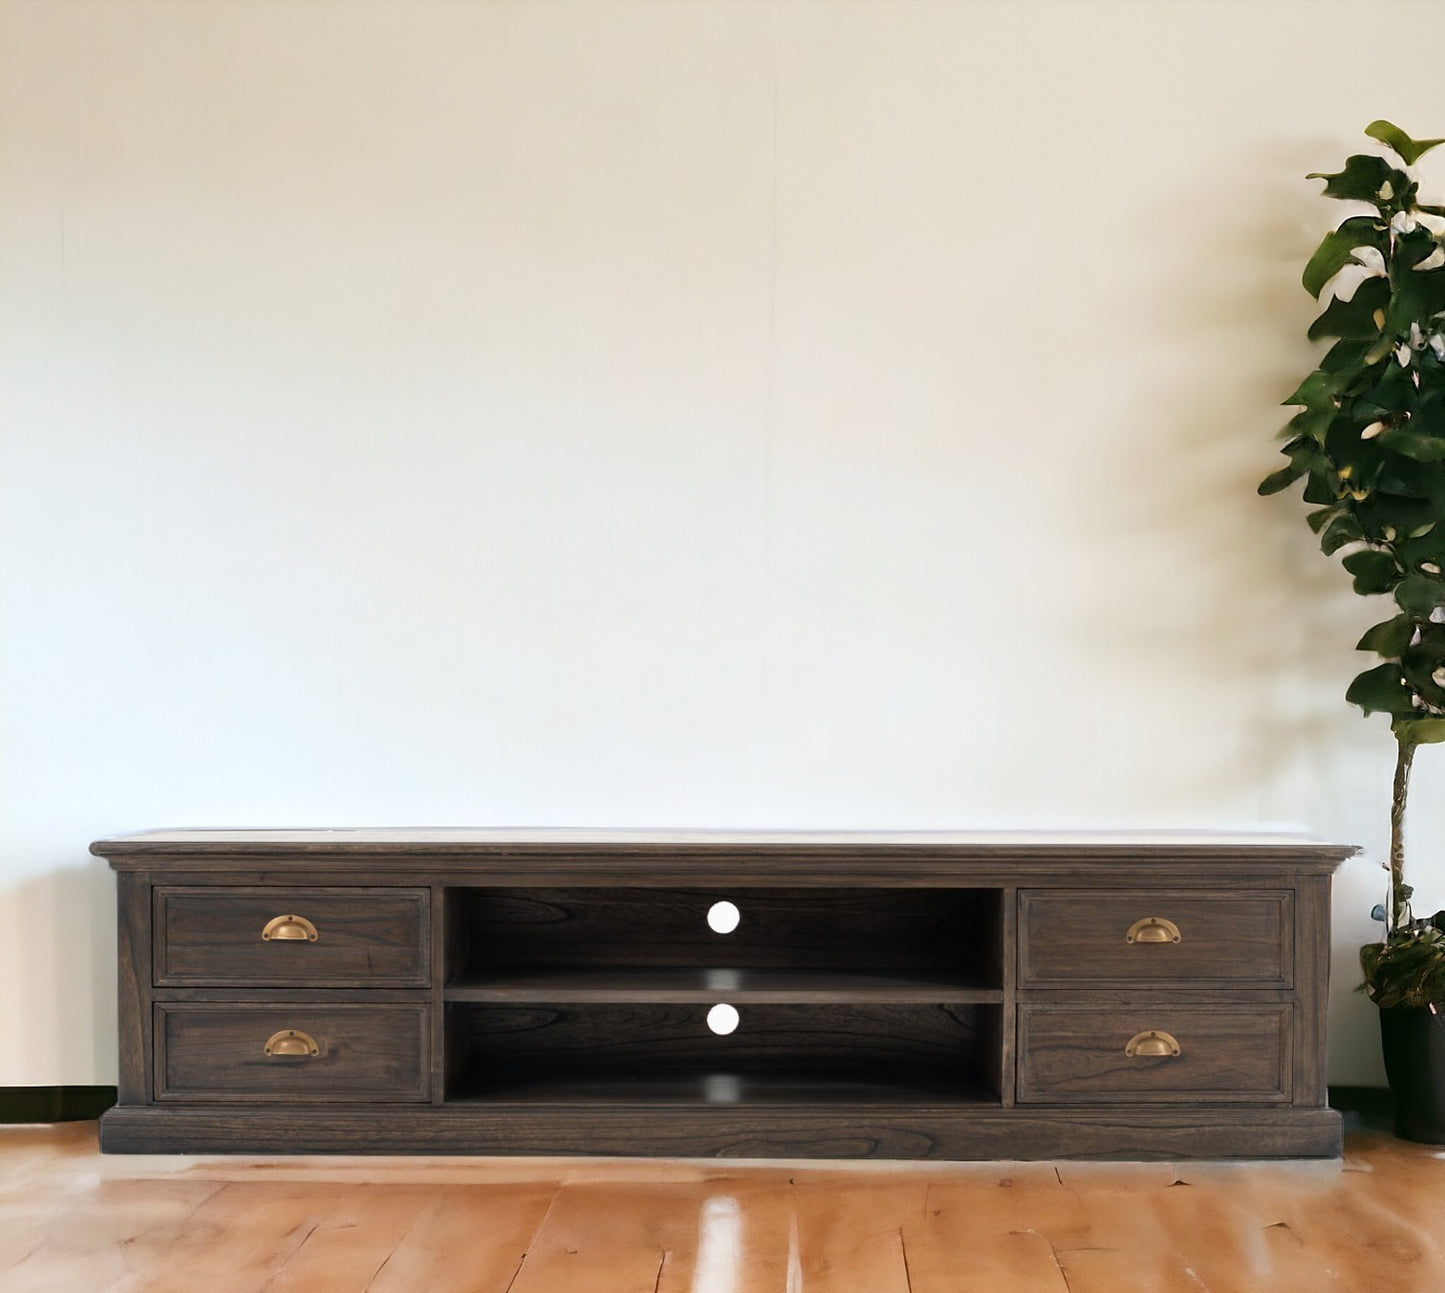 71" Black Wash Wood Entertainment Unit with Four Drawers